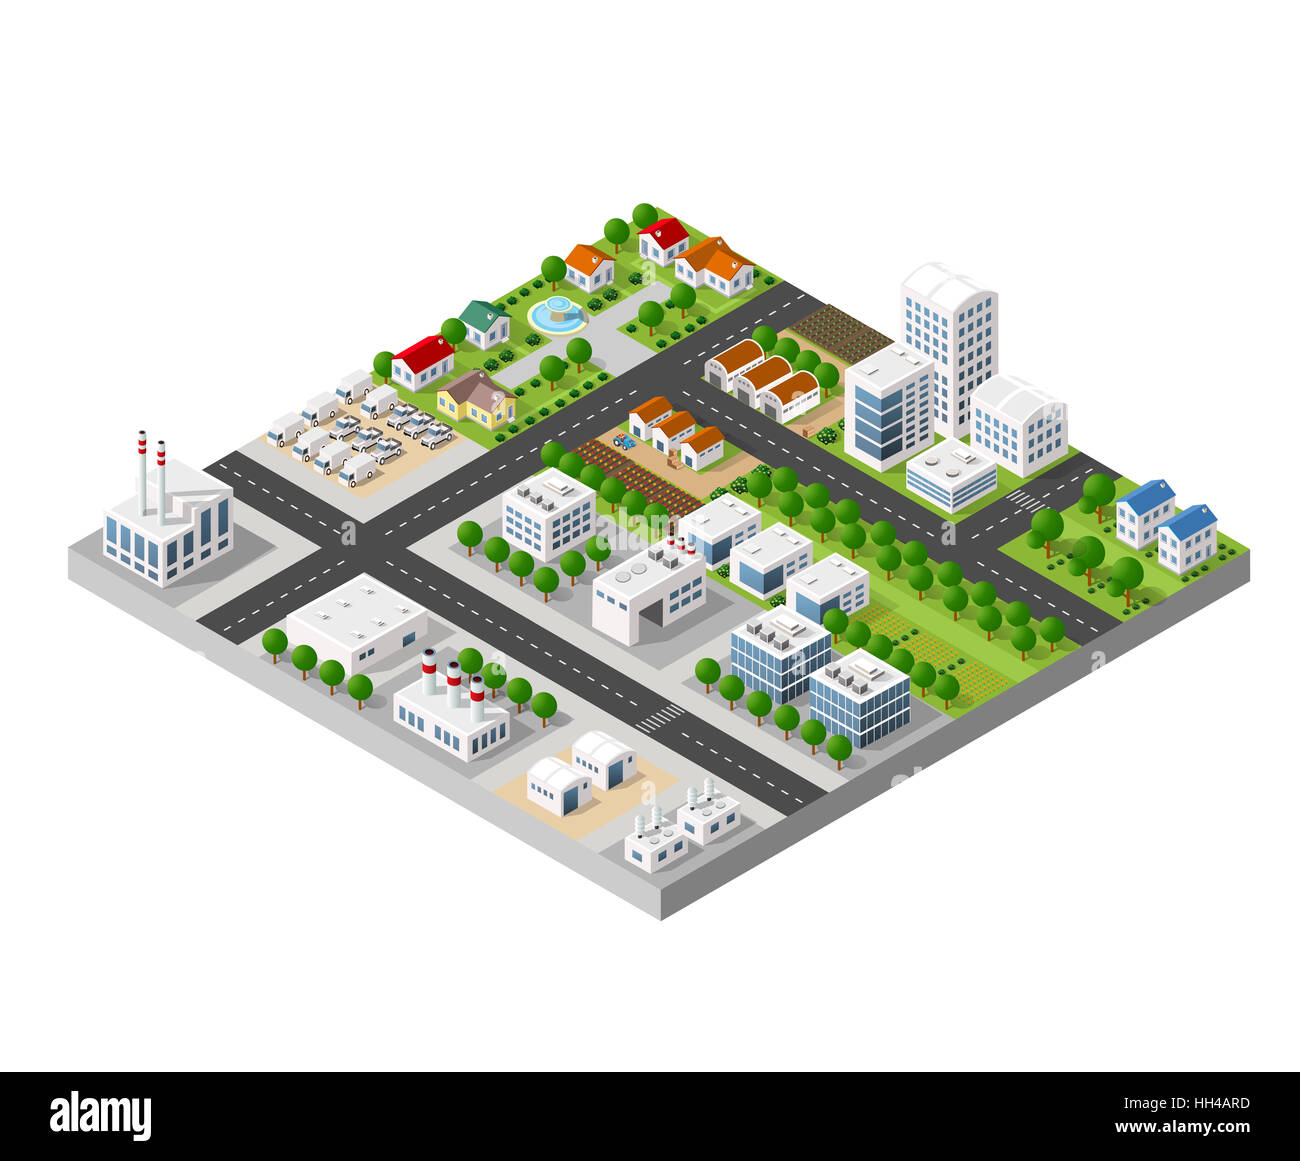 The 3D perspective view of a set of objects of industrial plants, factories, parking lots and warehouses. Isometric view from above the city with stre Stock Photo